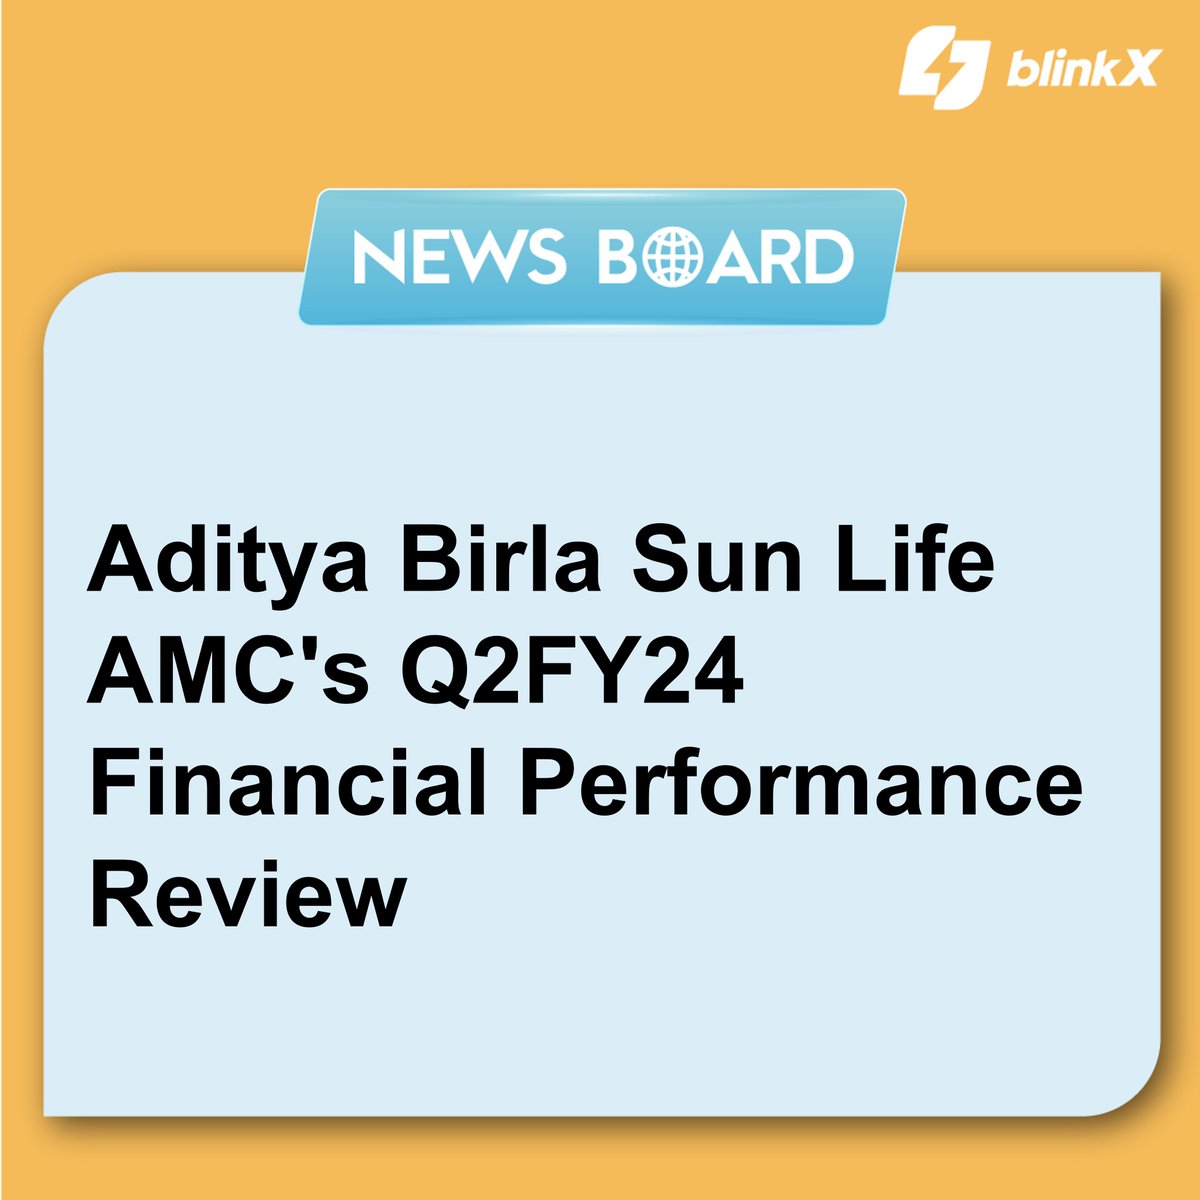 In this financial performance review, we delve into the results of Aditya Birla Sun Life AMC for Q2FY24...

Read more at: blinkx.in/news/quarterly…

#adityabirlafinance #stockmarket #investor #investments #finance #research #quarterlyresultsbyblinkX
#MadeForTheMarket #blinkX